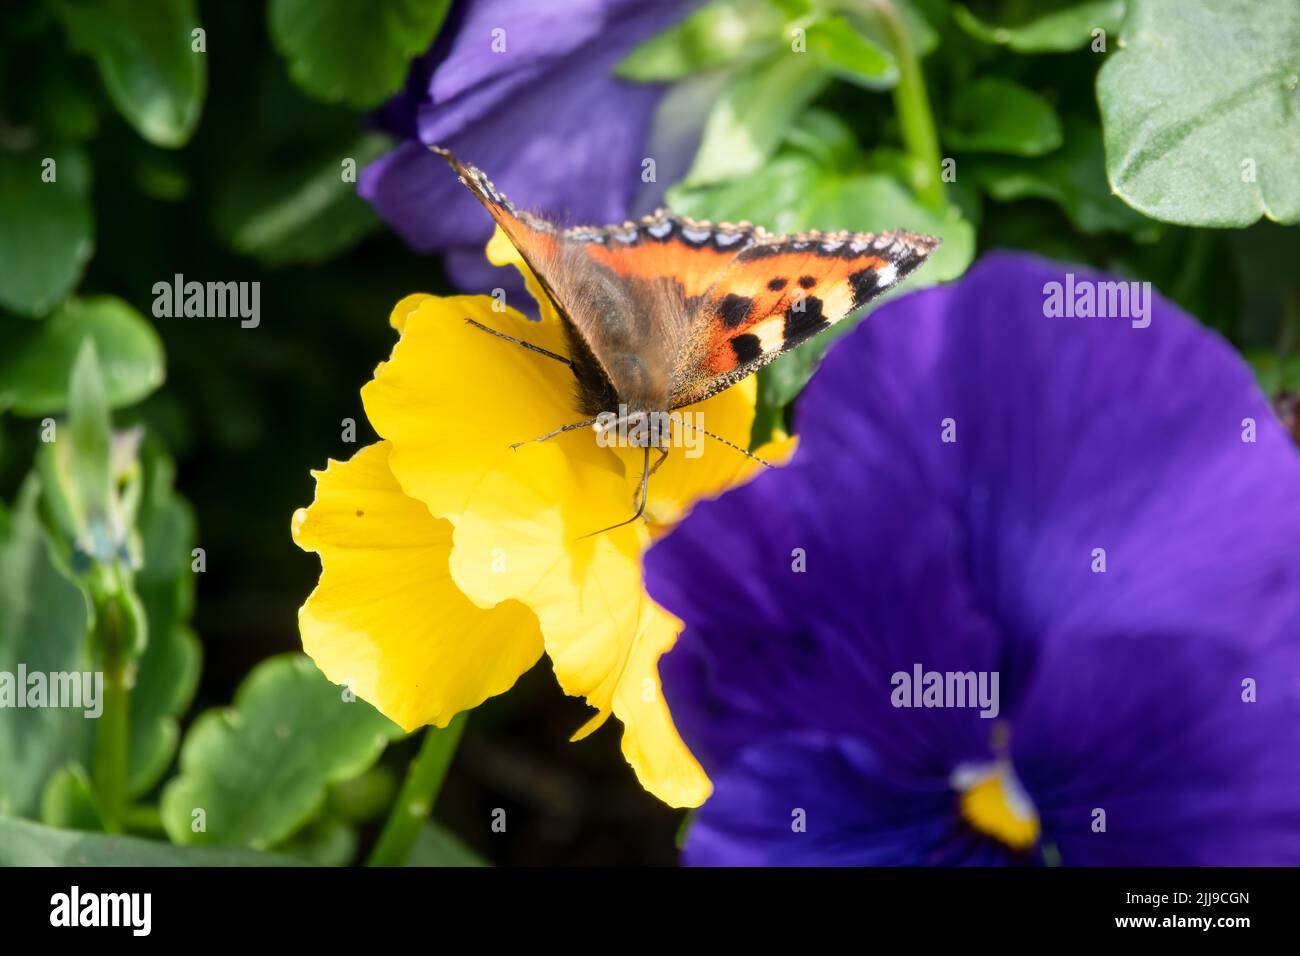 detailed close up of a Small Tortoiseshell butterfly (Aglais urticae) feeding on blue Pansies (Viola tricolor var. hortensis) Stock Photo